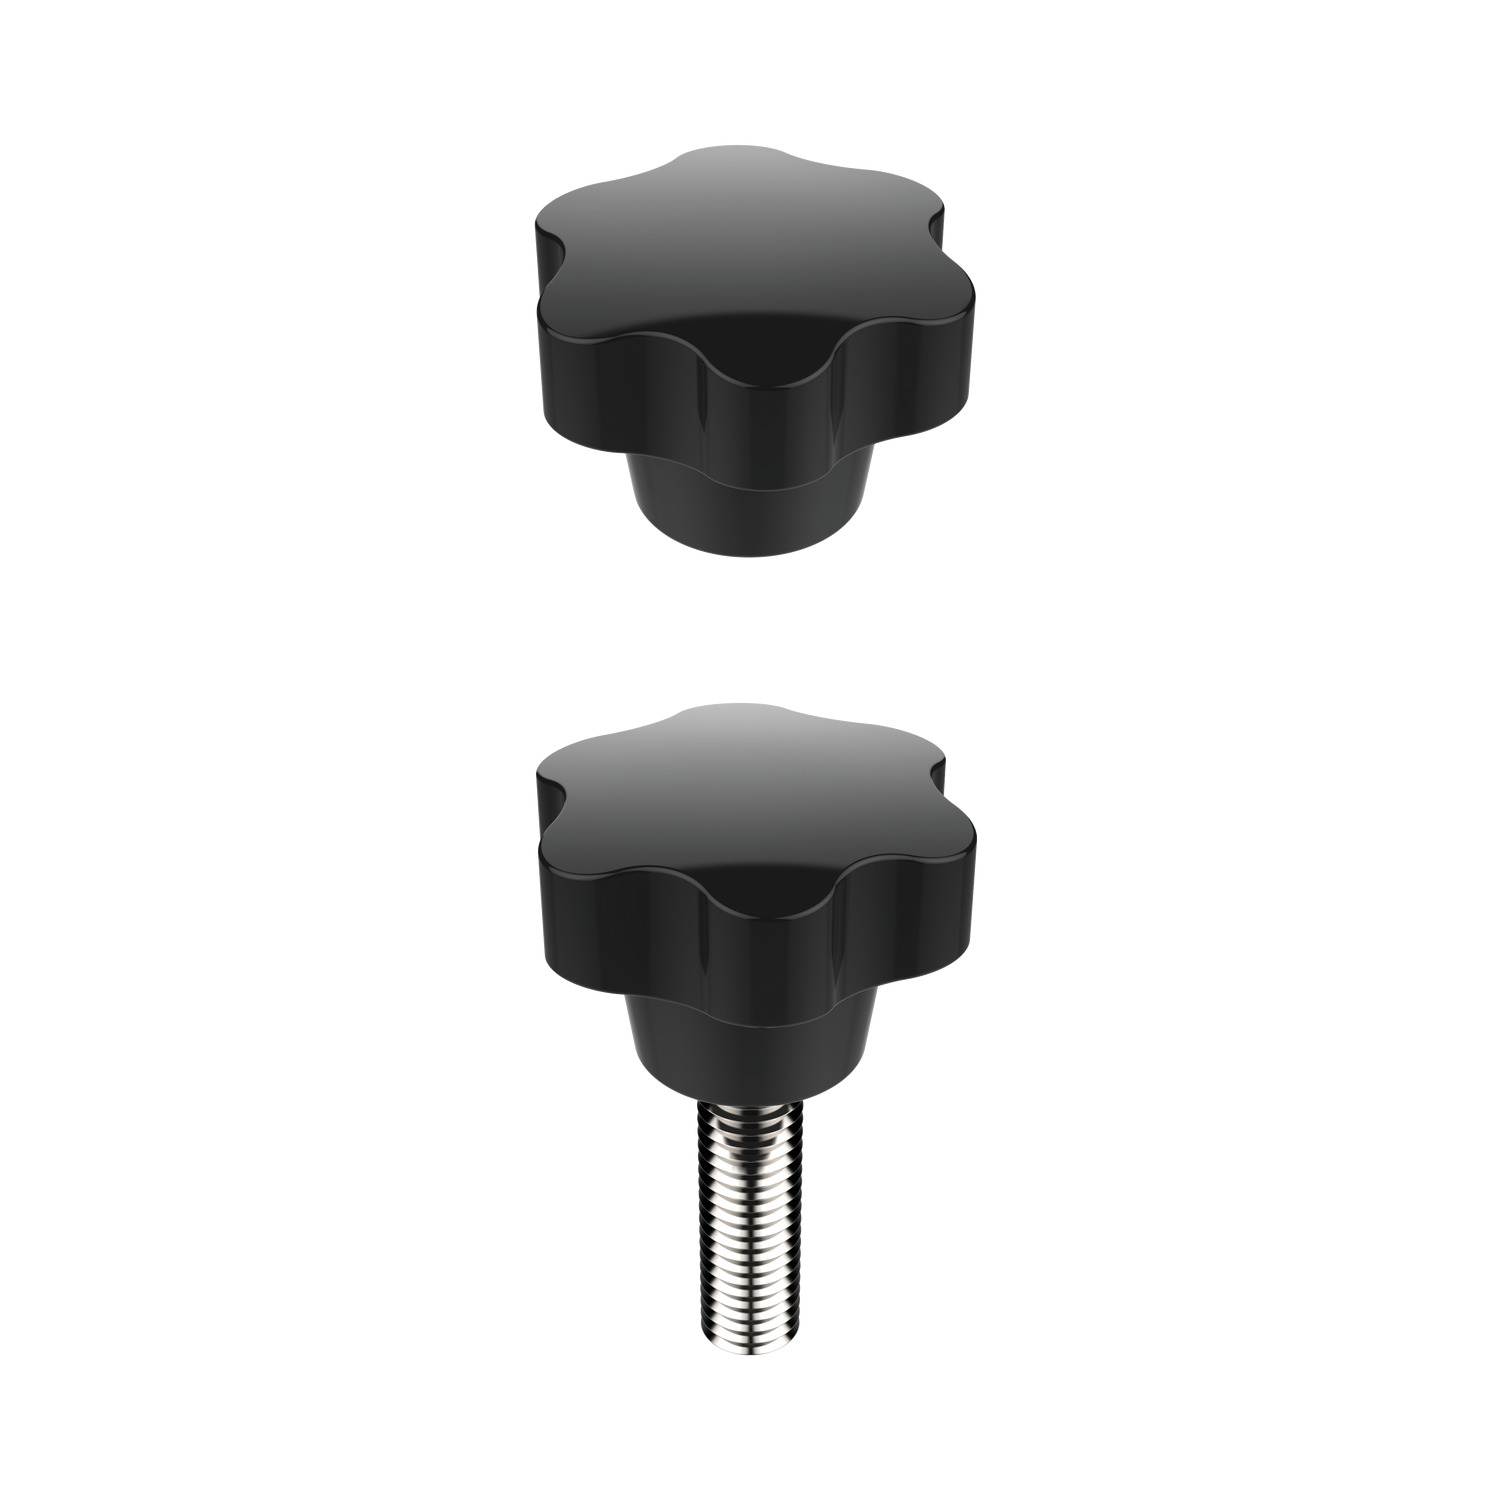 Six Lobed Knobs Black plastic six lobed knobs. Available in sizes from M4 to M6.